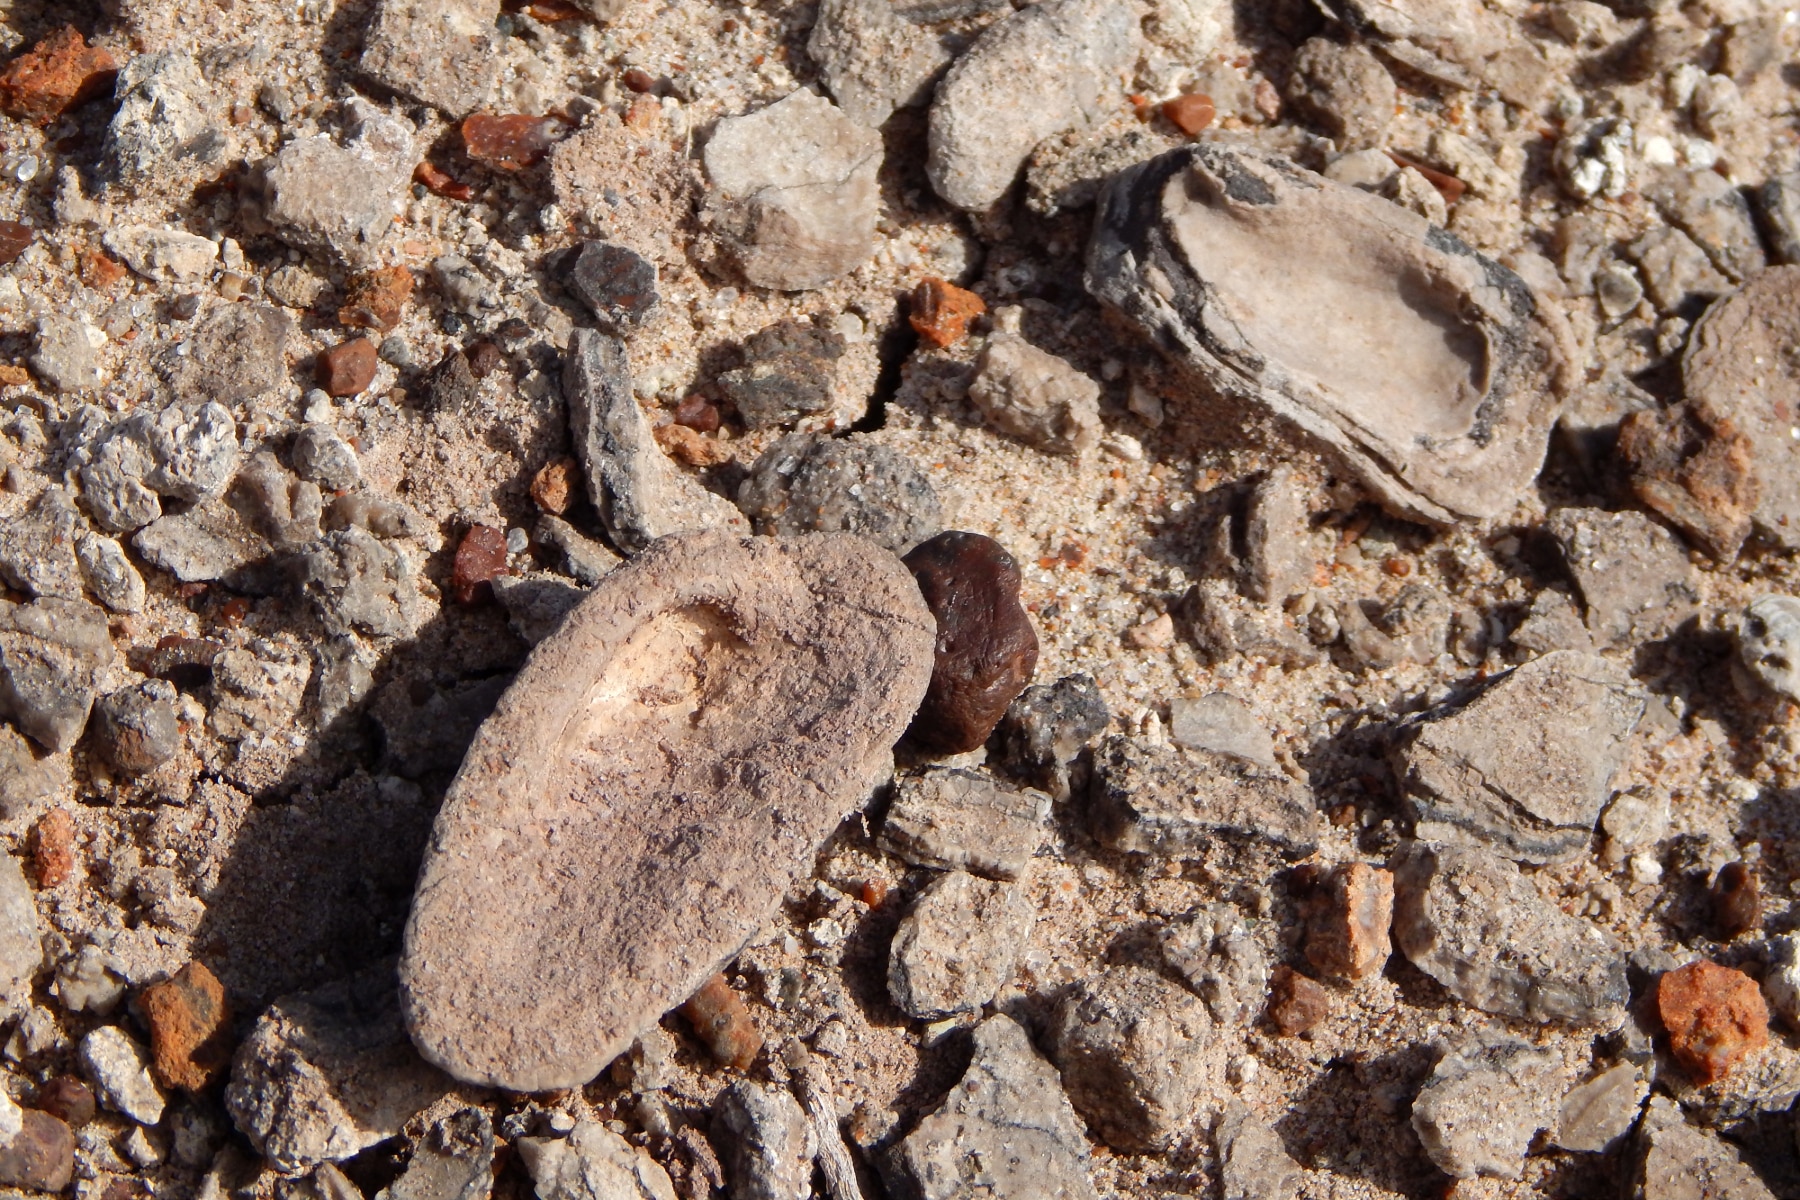 Freshwater clam fossils mixed among the rocks and sand at Petrified Forest National Park.